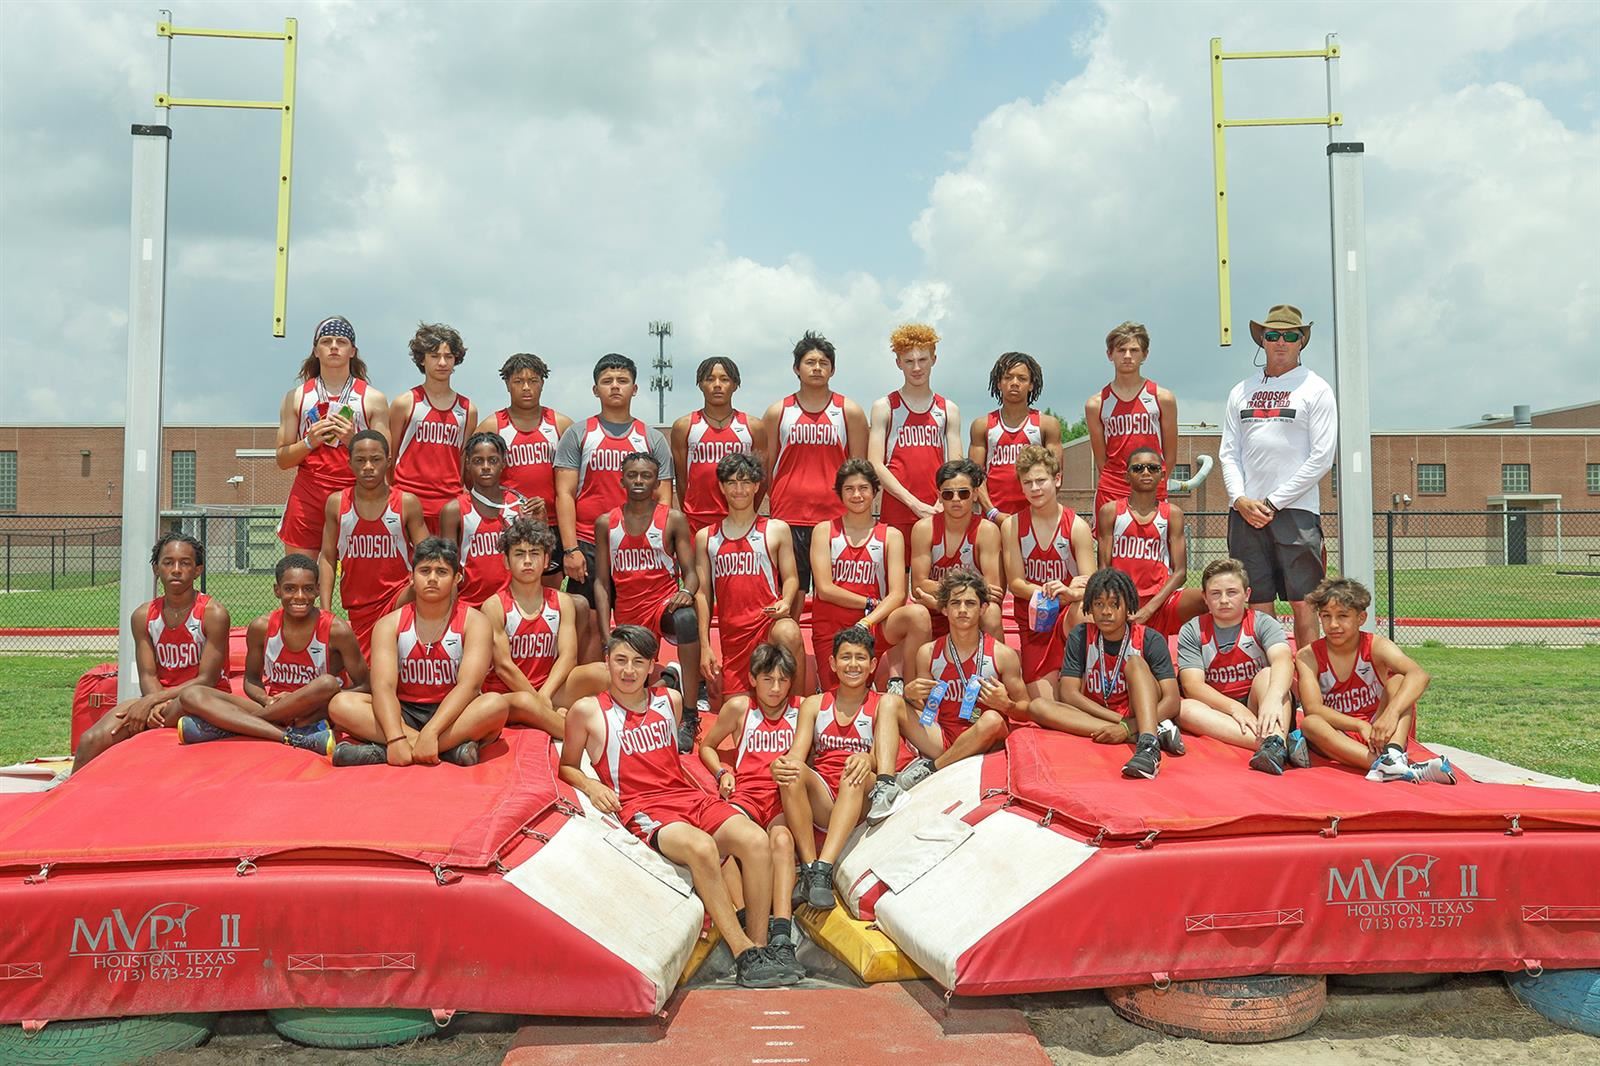 Goodson Middle School won the seventh grade boys’ track and field title with 100.6 points. 